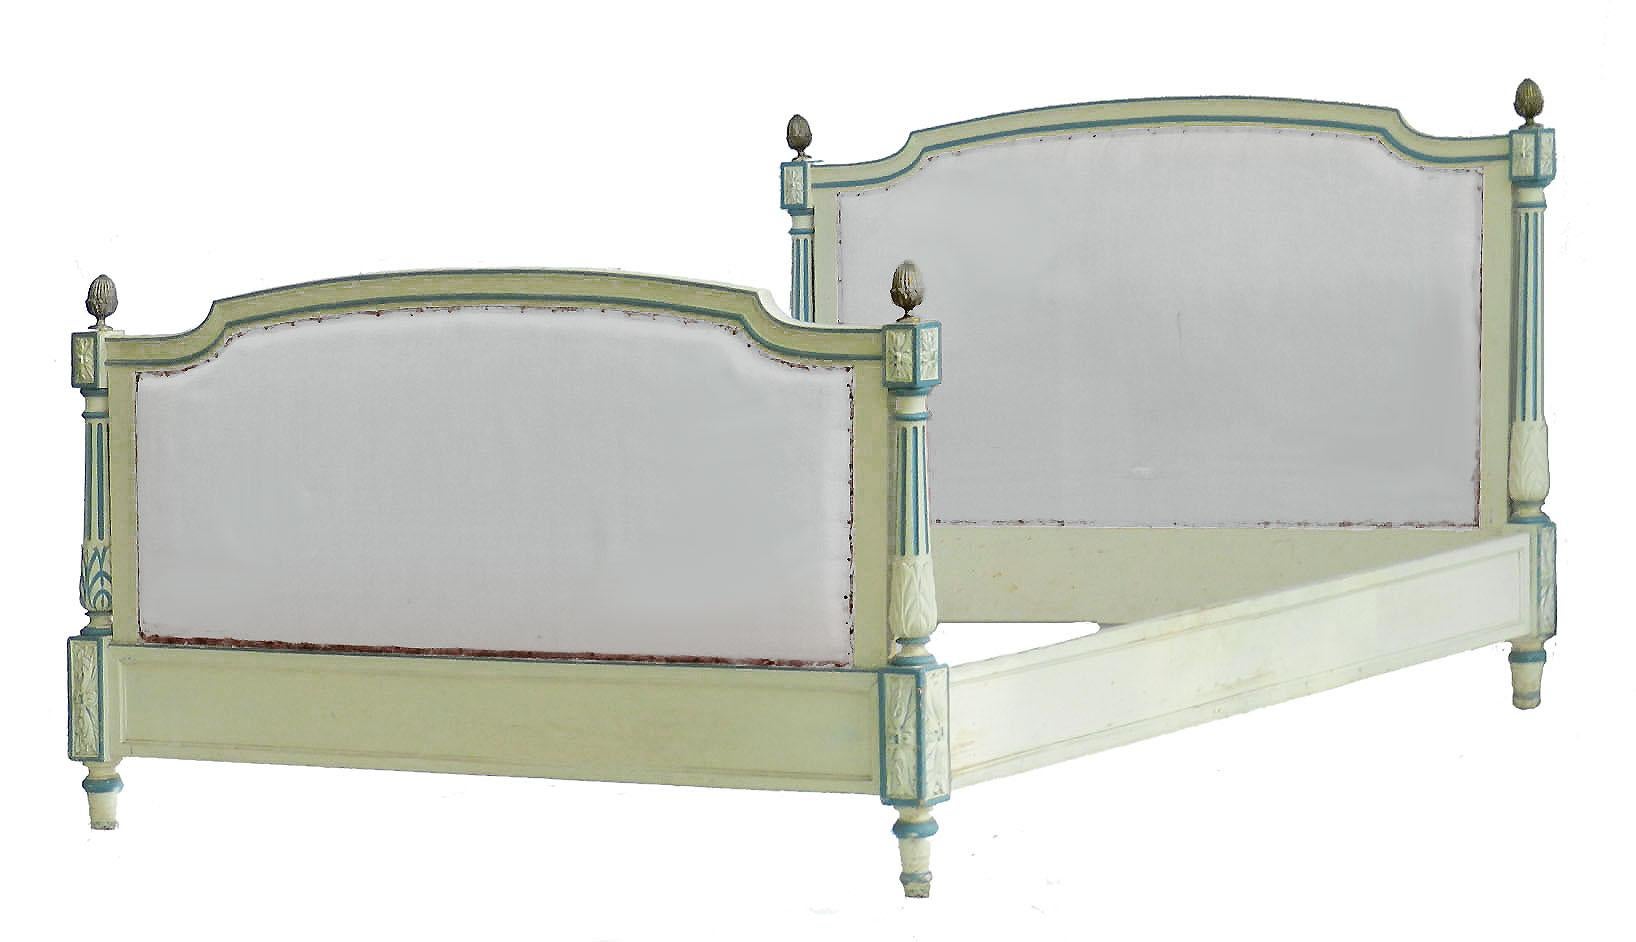 Antique French Bed US Queen UK King size Louis XVI revival recover customize (20. Jahrhundert)